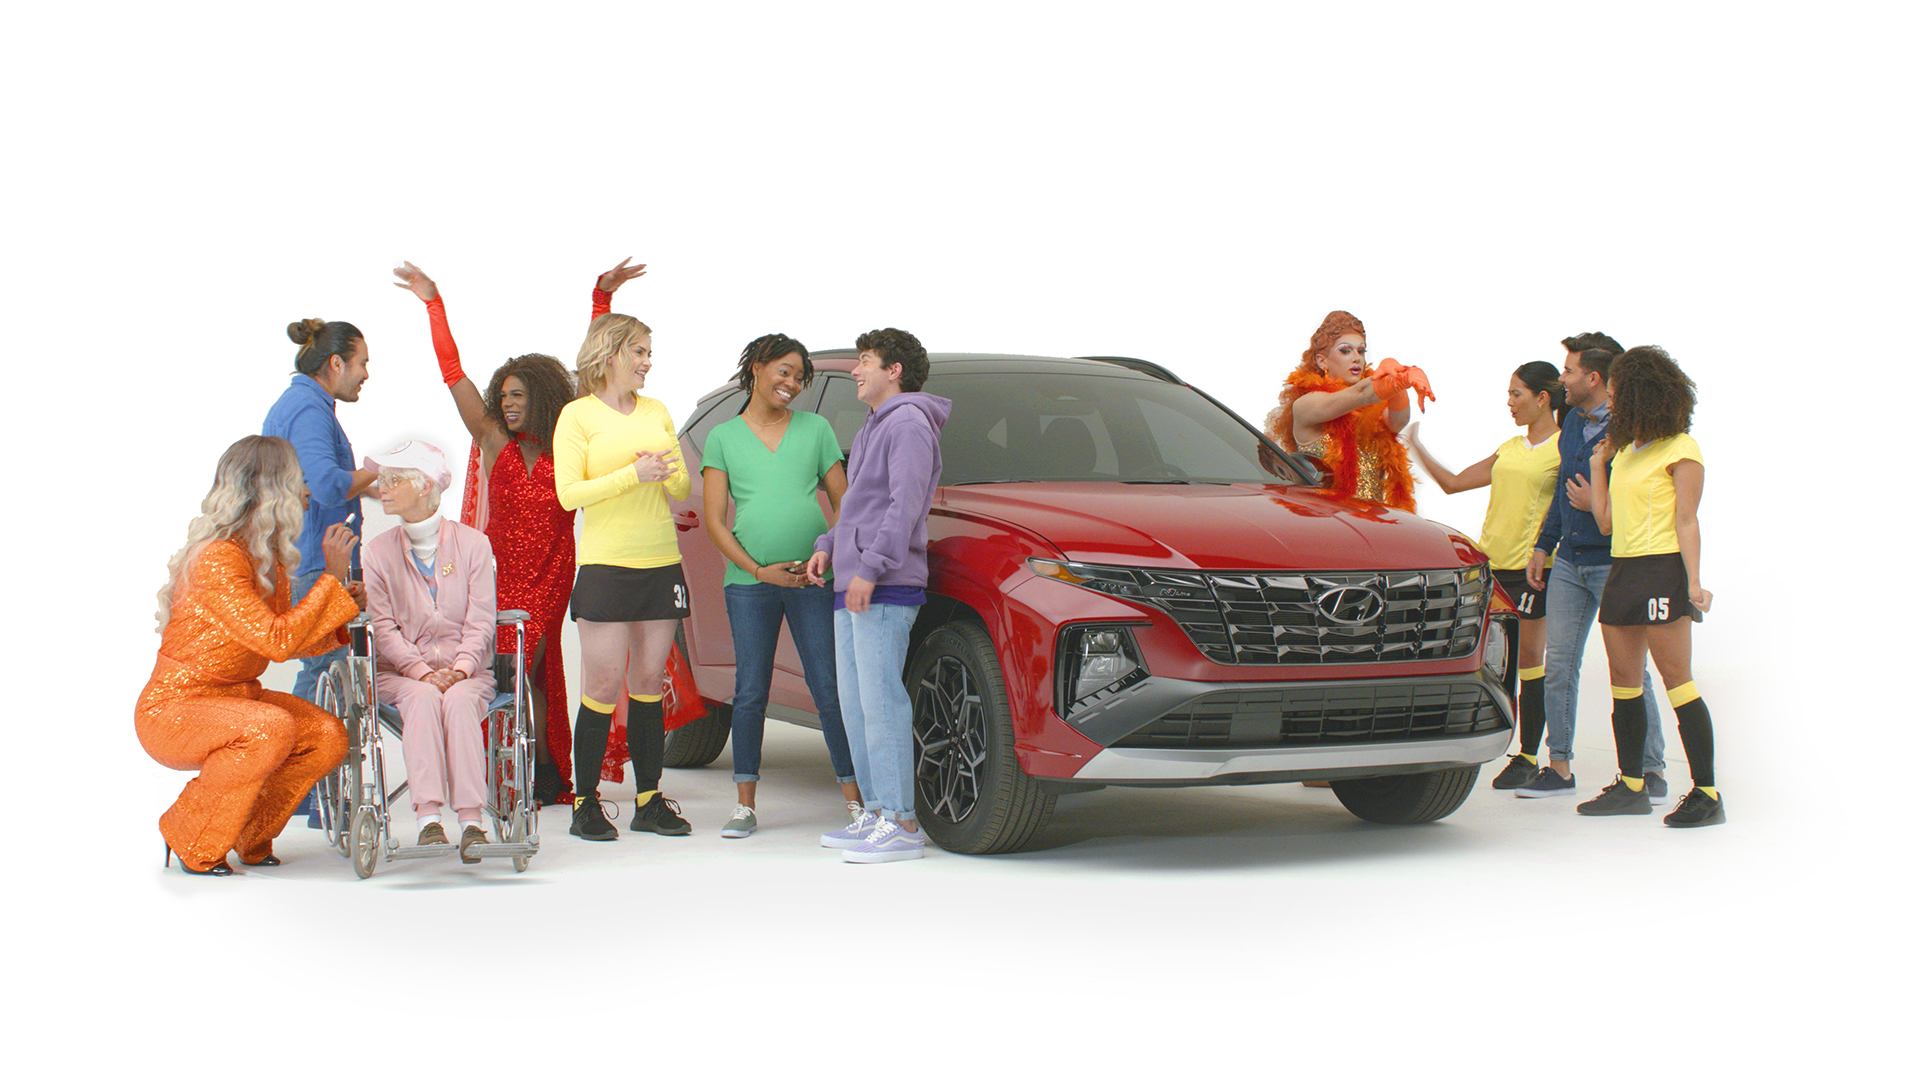 Hyundai Extends Support for the LGBTQ Community with Several Partnerships in 2021